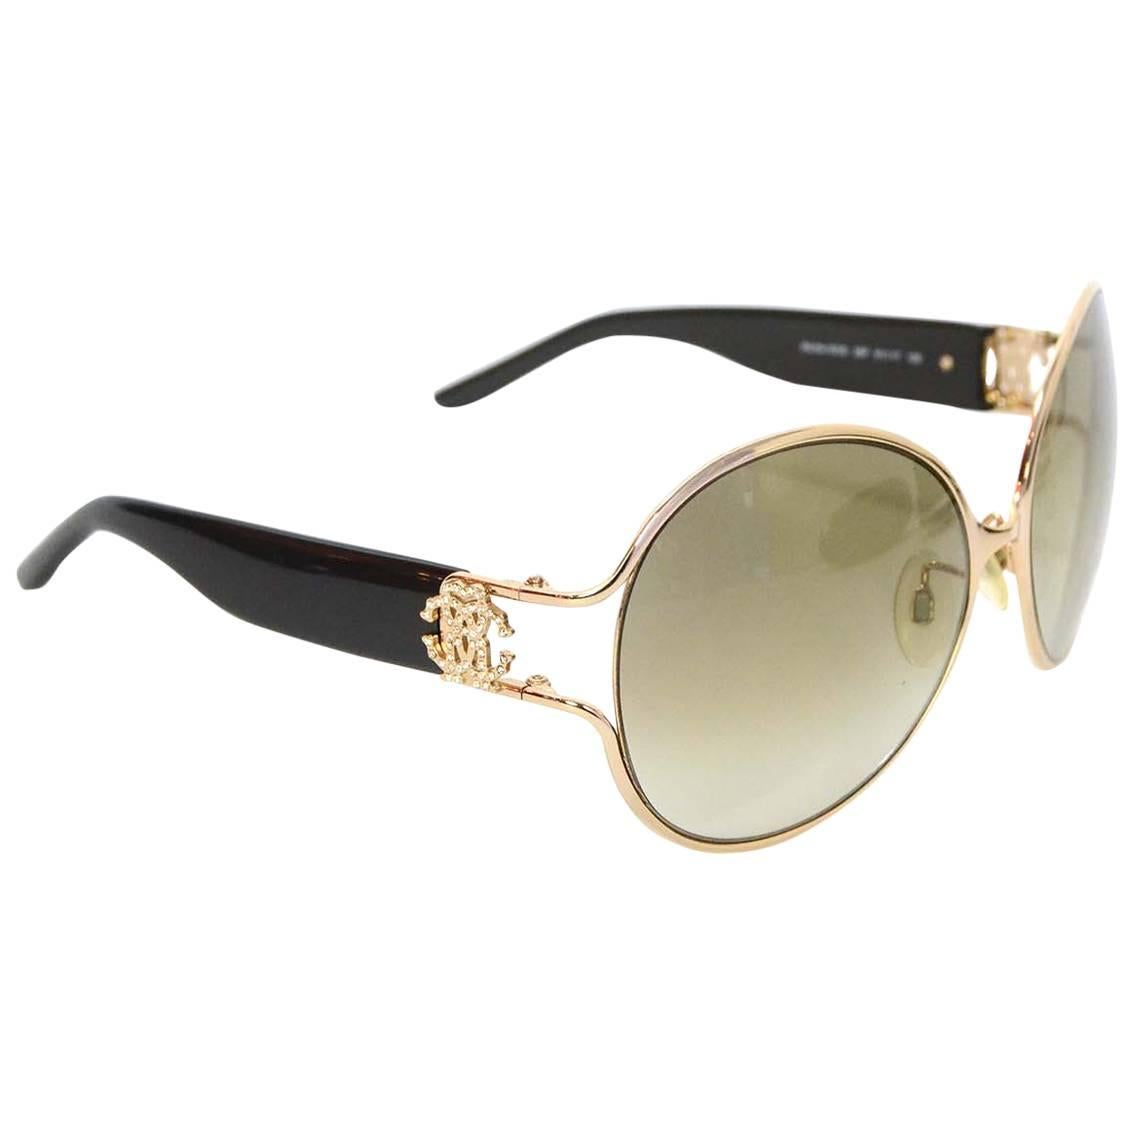 Roberto Cavalli Round Frame Sunglasses with Crystals and Case